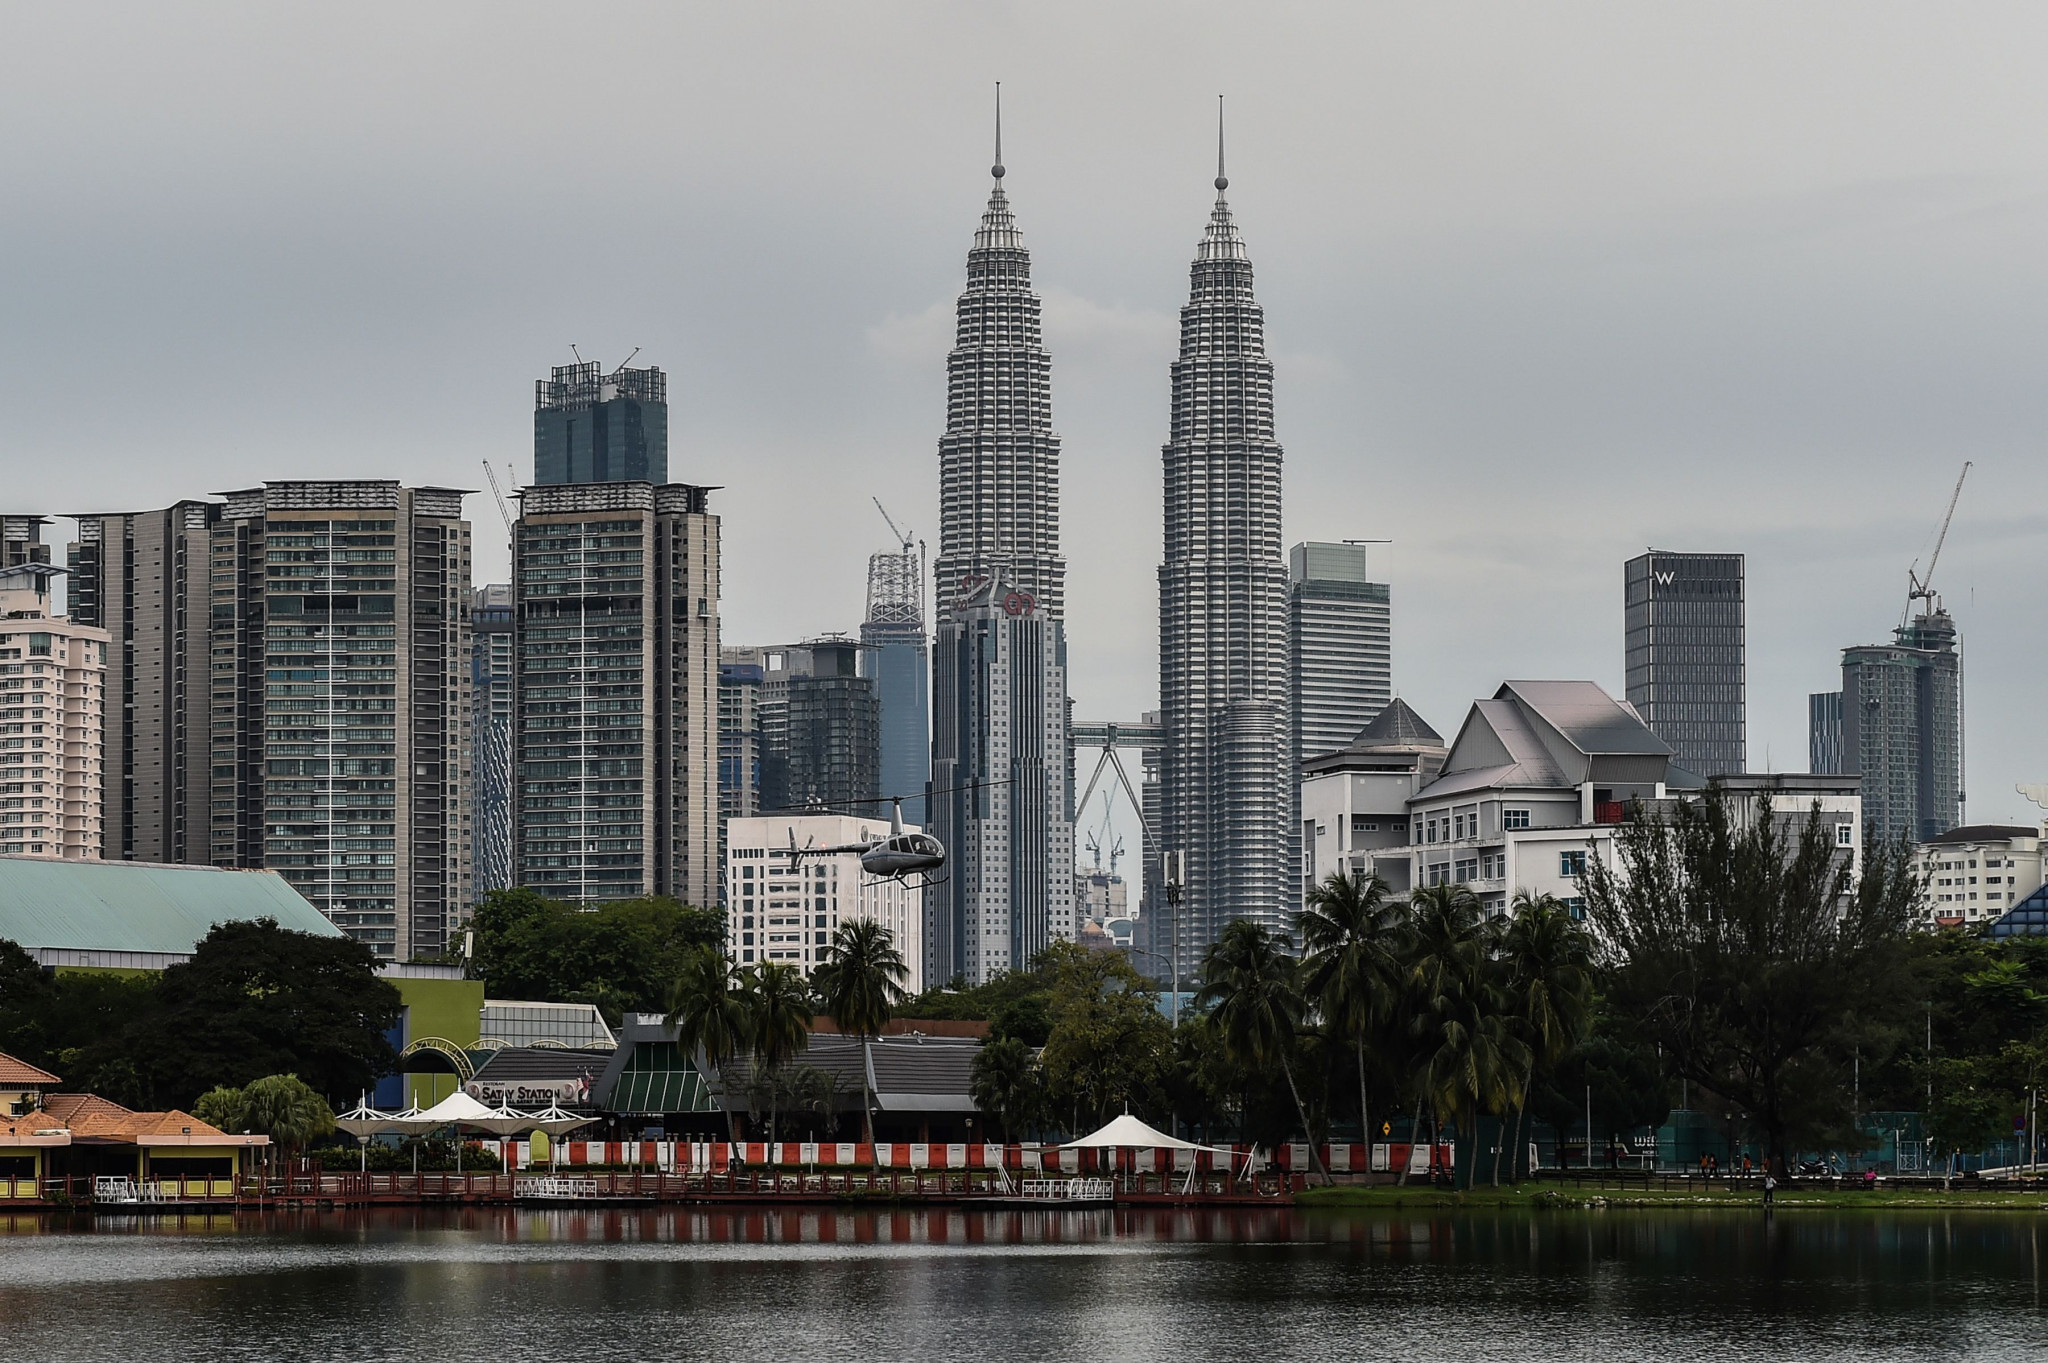 Malaysia's capital Kuala Lumpur played host to the AUSF General Assembly ©Getty Images